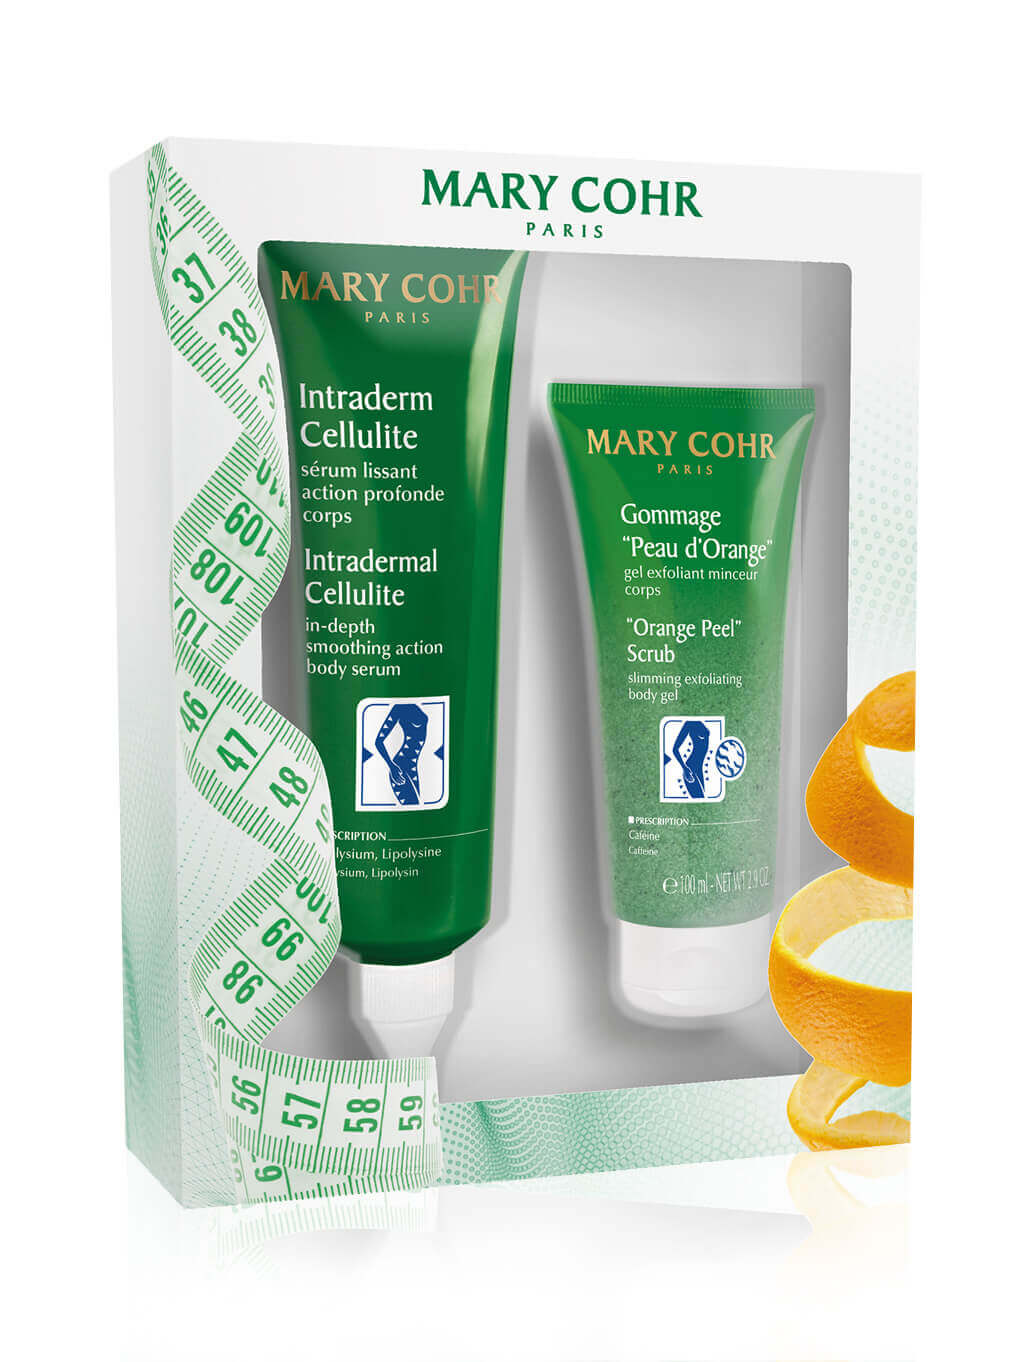 Mary Cohr Mary Cohr Intraderm Cellulite Kit 125ml + 100ml - Small Lovely  piece of Paris Near You!